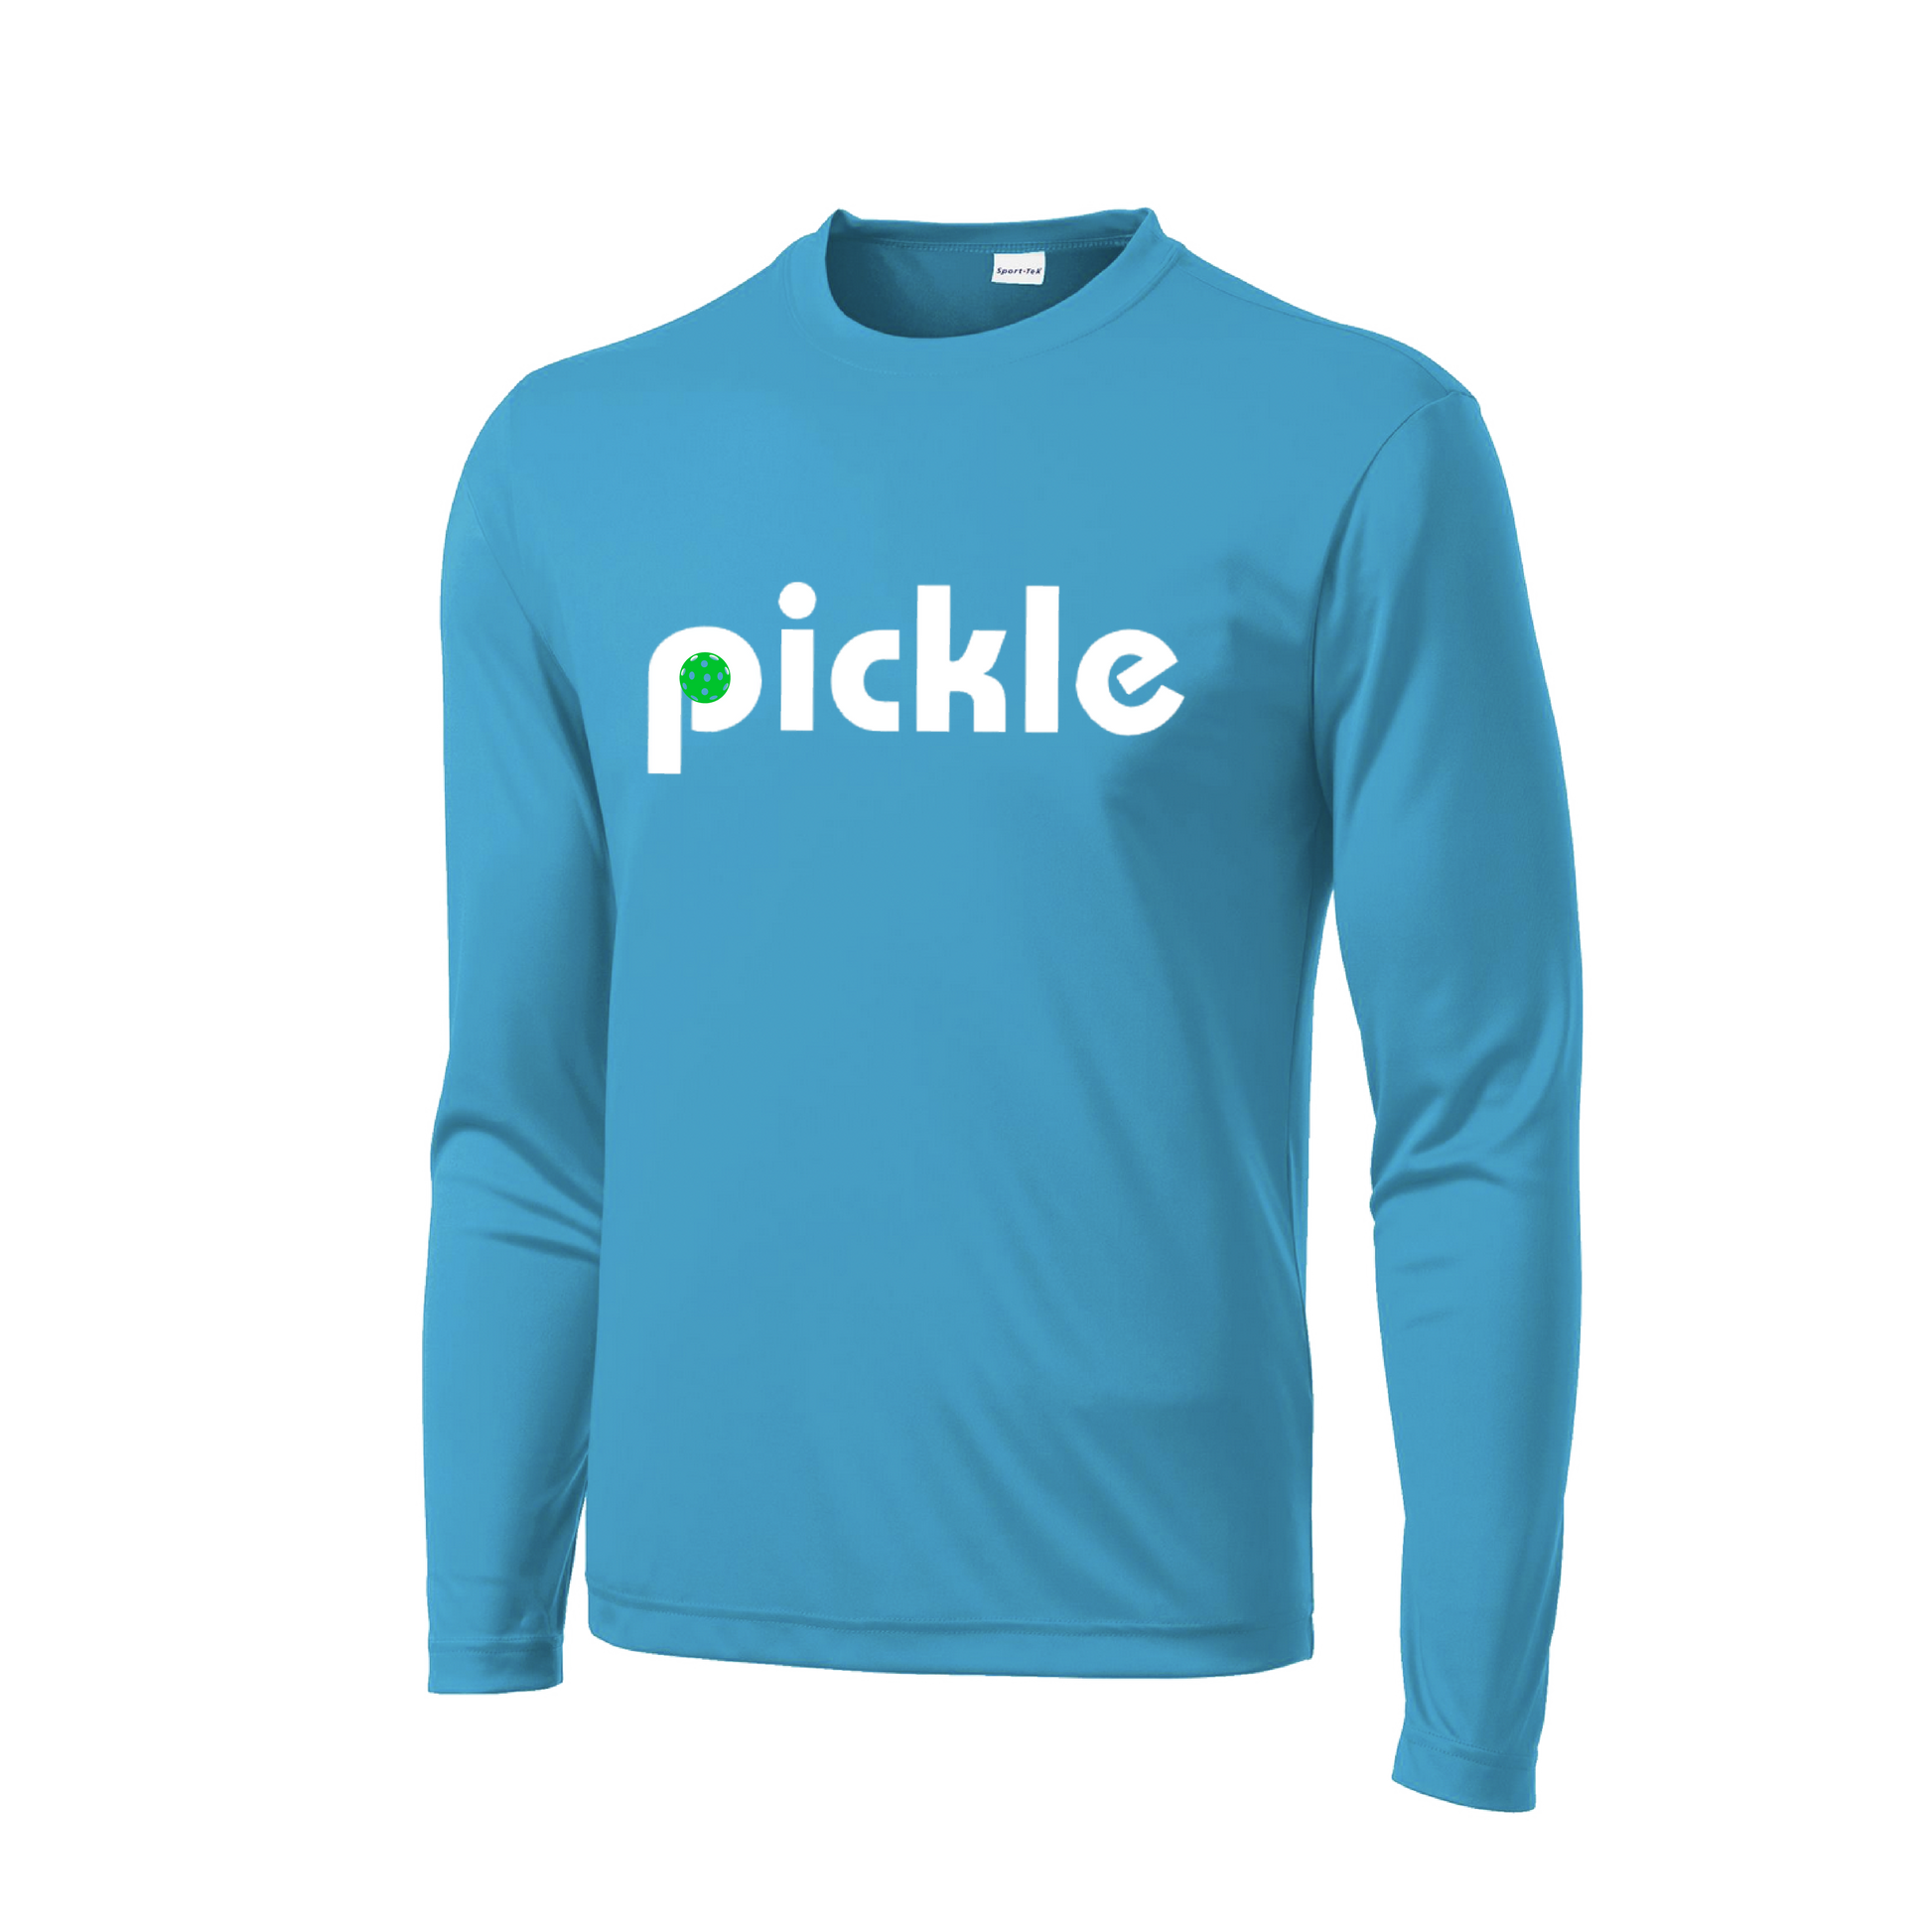 These pickleball shirts are lightweight yet spacious, promoting air circulation. Moisture-wicking characteristics provide athletic advantage, and PosiCharge technology ensures long-lasting colors and logos that will not fade. Comfort is further enhanced by removable tag and set-in sleeve design.